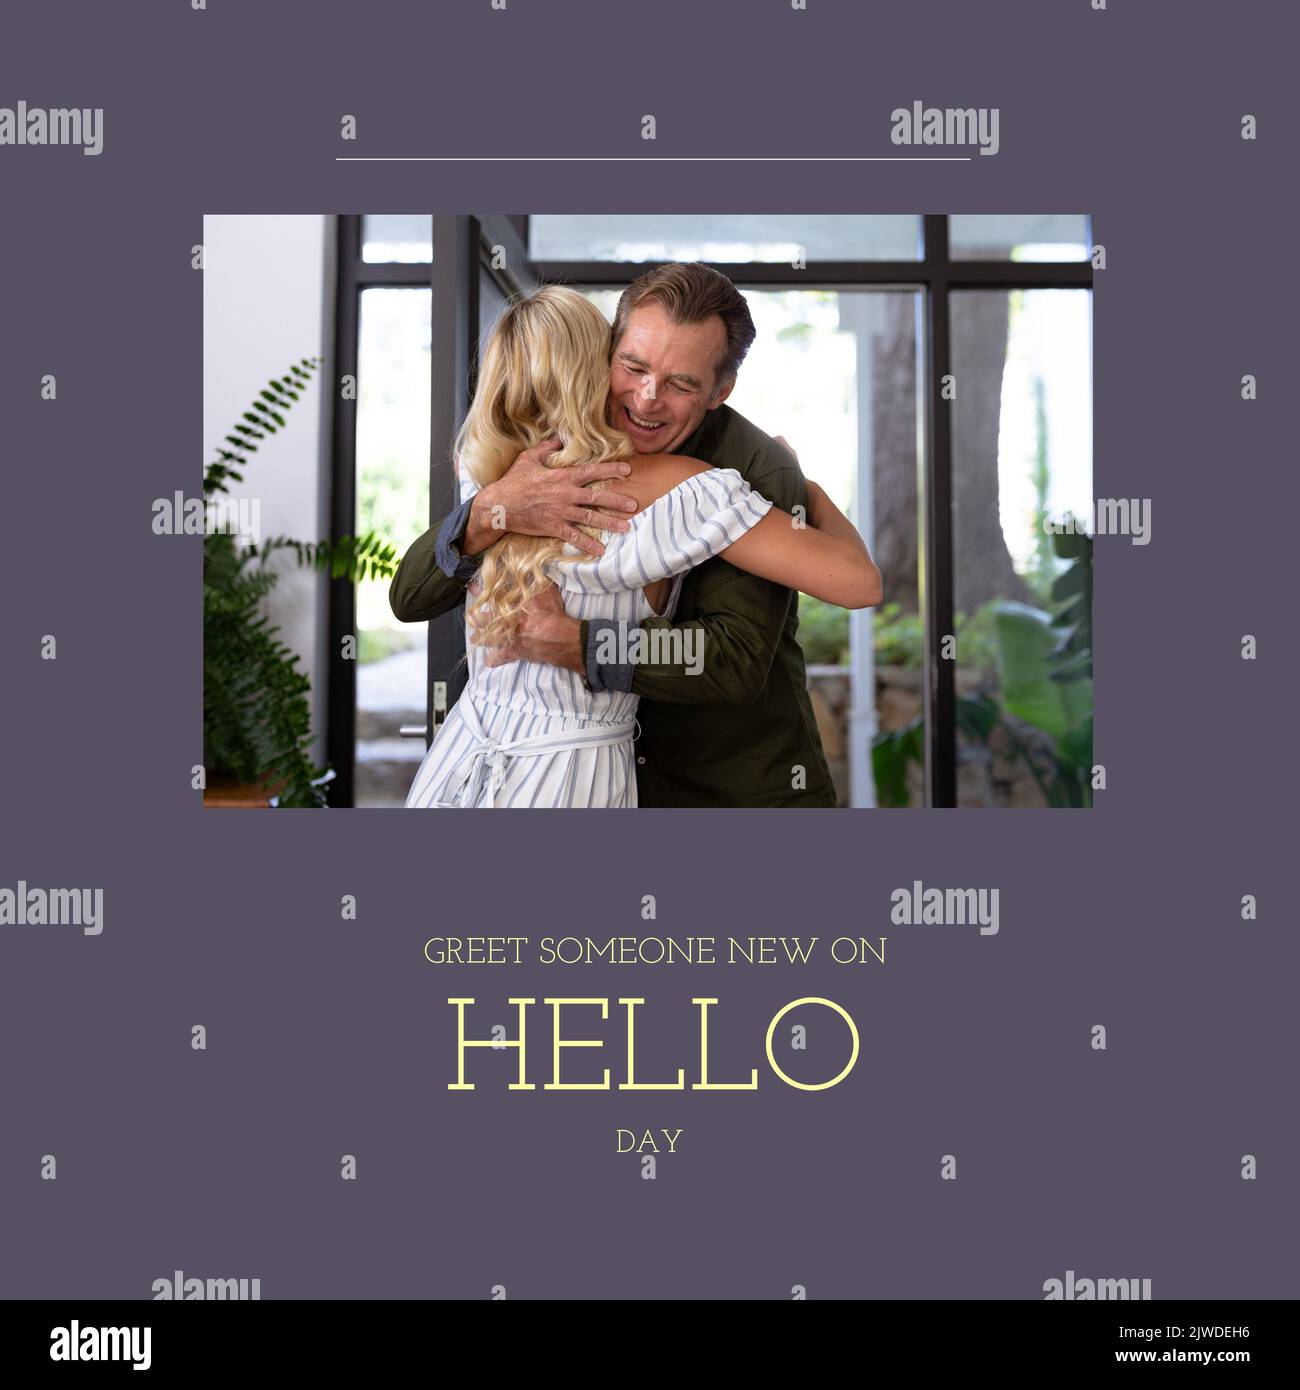 Composition of greet someone new on hello day text with caucasian couple embracing Stock Photo